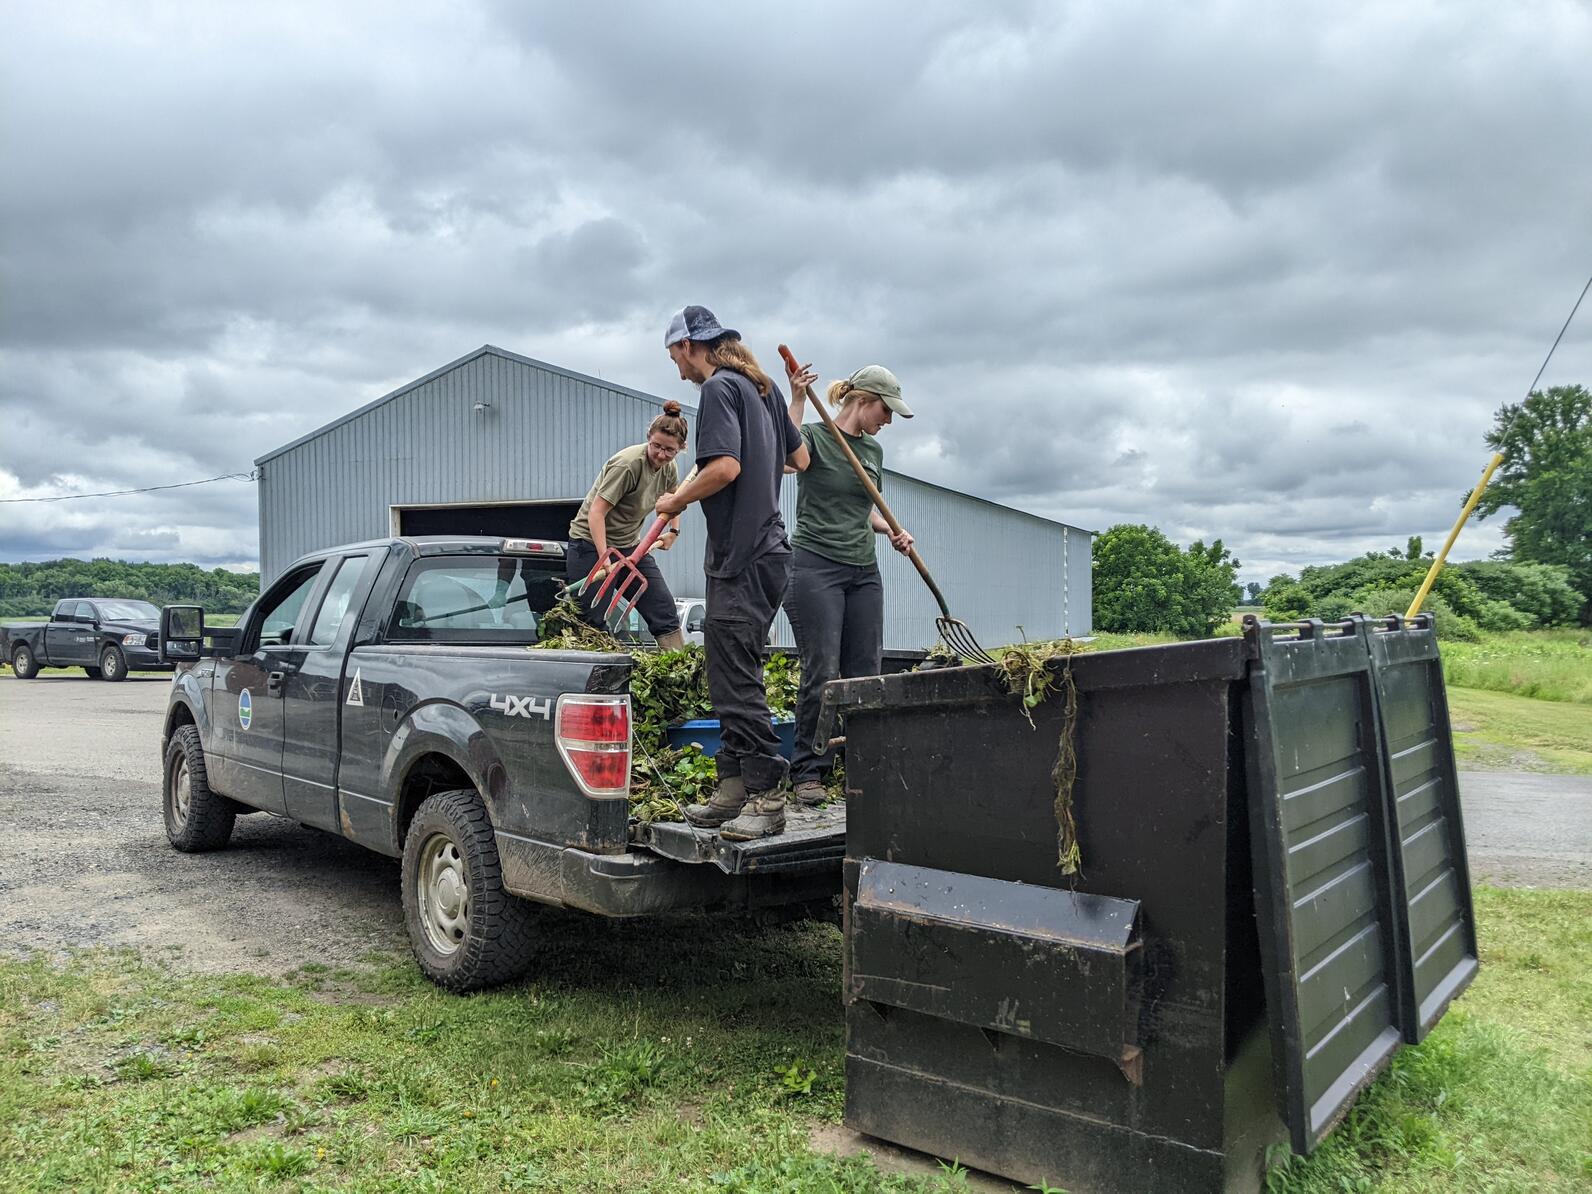 Three people stand in the back of a black pickup truck, using pitchforks to toss water chestnut into a dumpster.